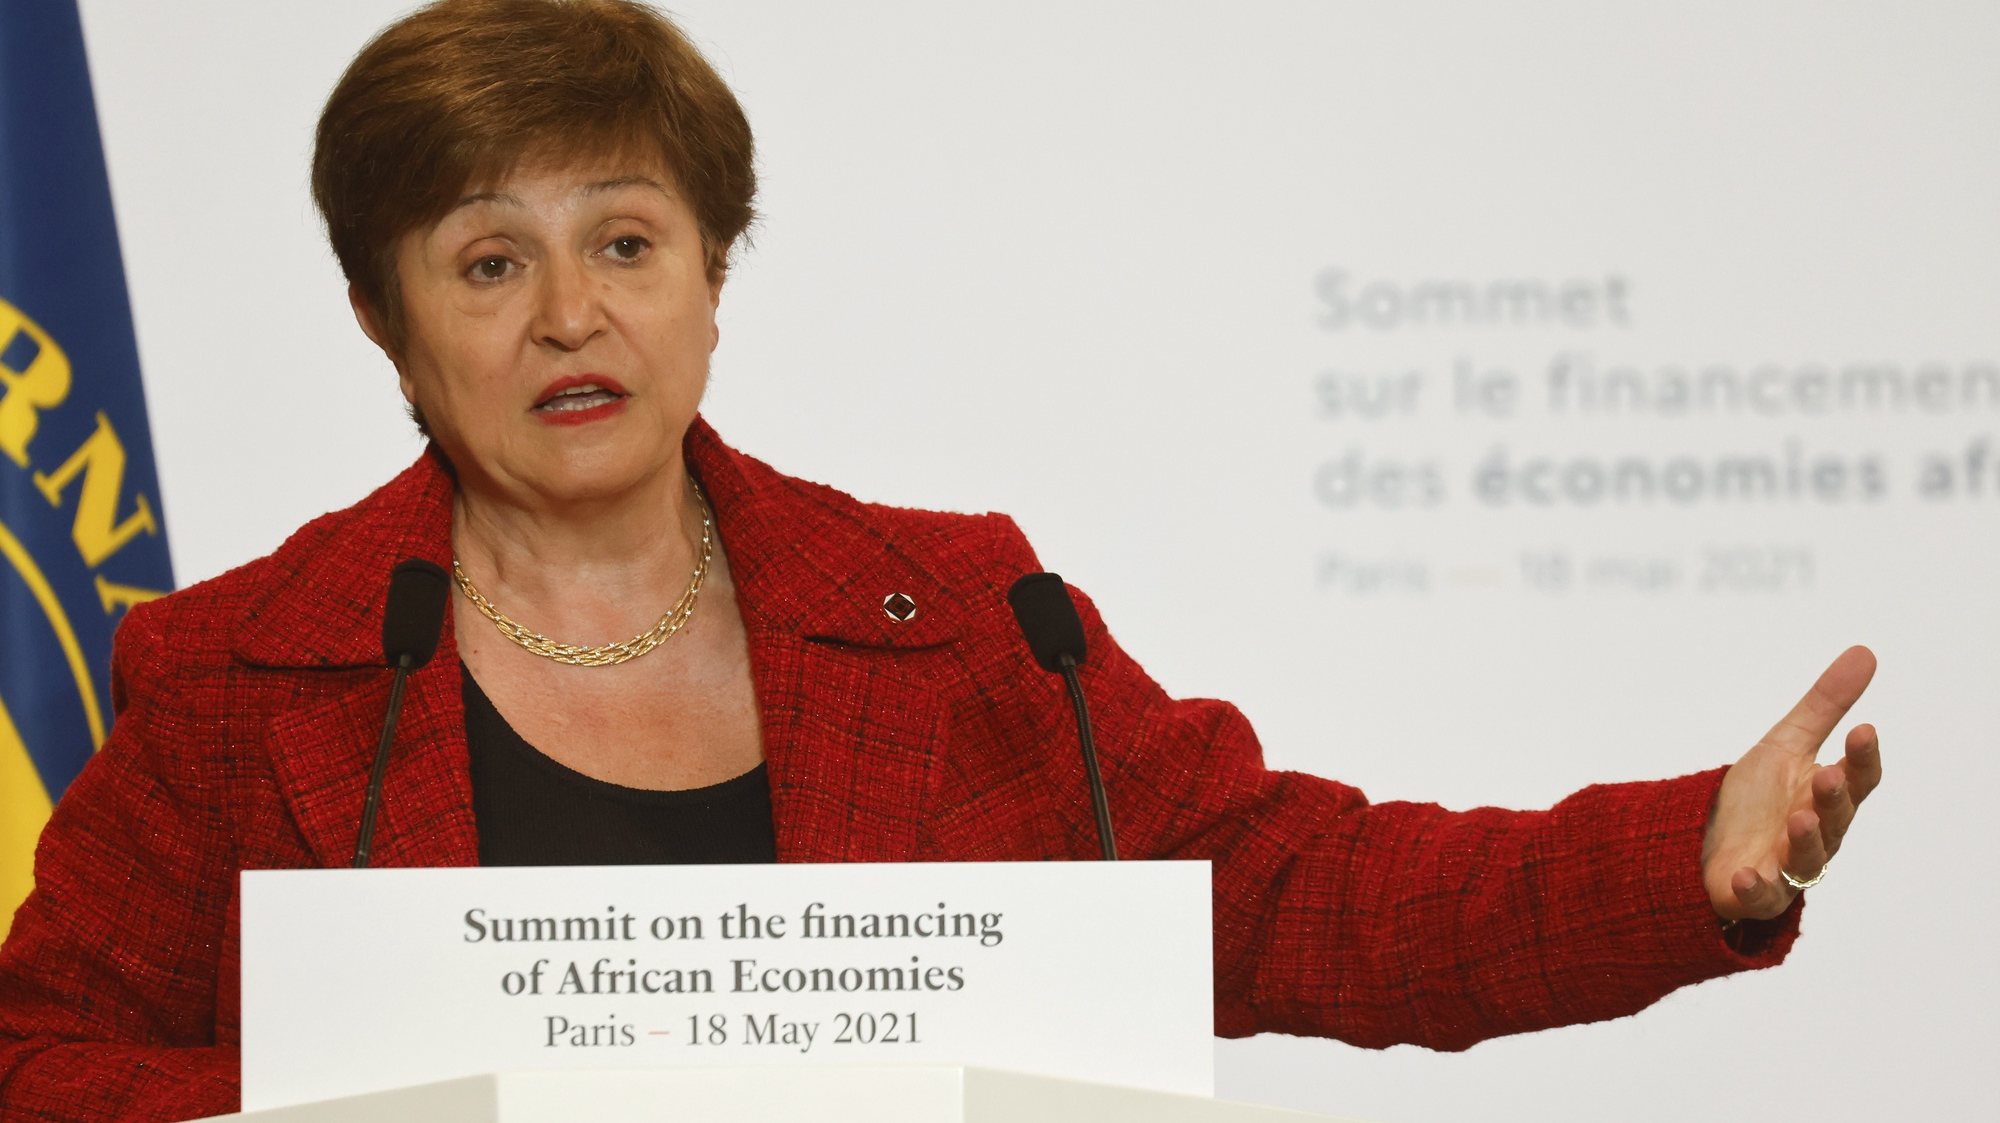 epa09210136 International Monetary Fund (IMF) Managing Director Kristalina Georgieva speaks during a joint press conference at the end of the Summit on the Financing of African Economies in Paris, France, 18 May 2021.  EPA/LUDOVIC MARIN / POOL  MAXPPP OUT